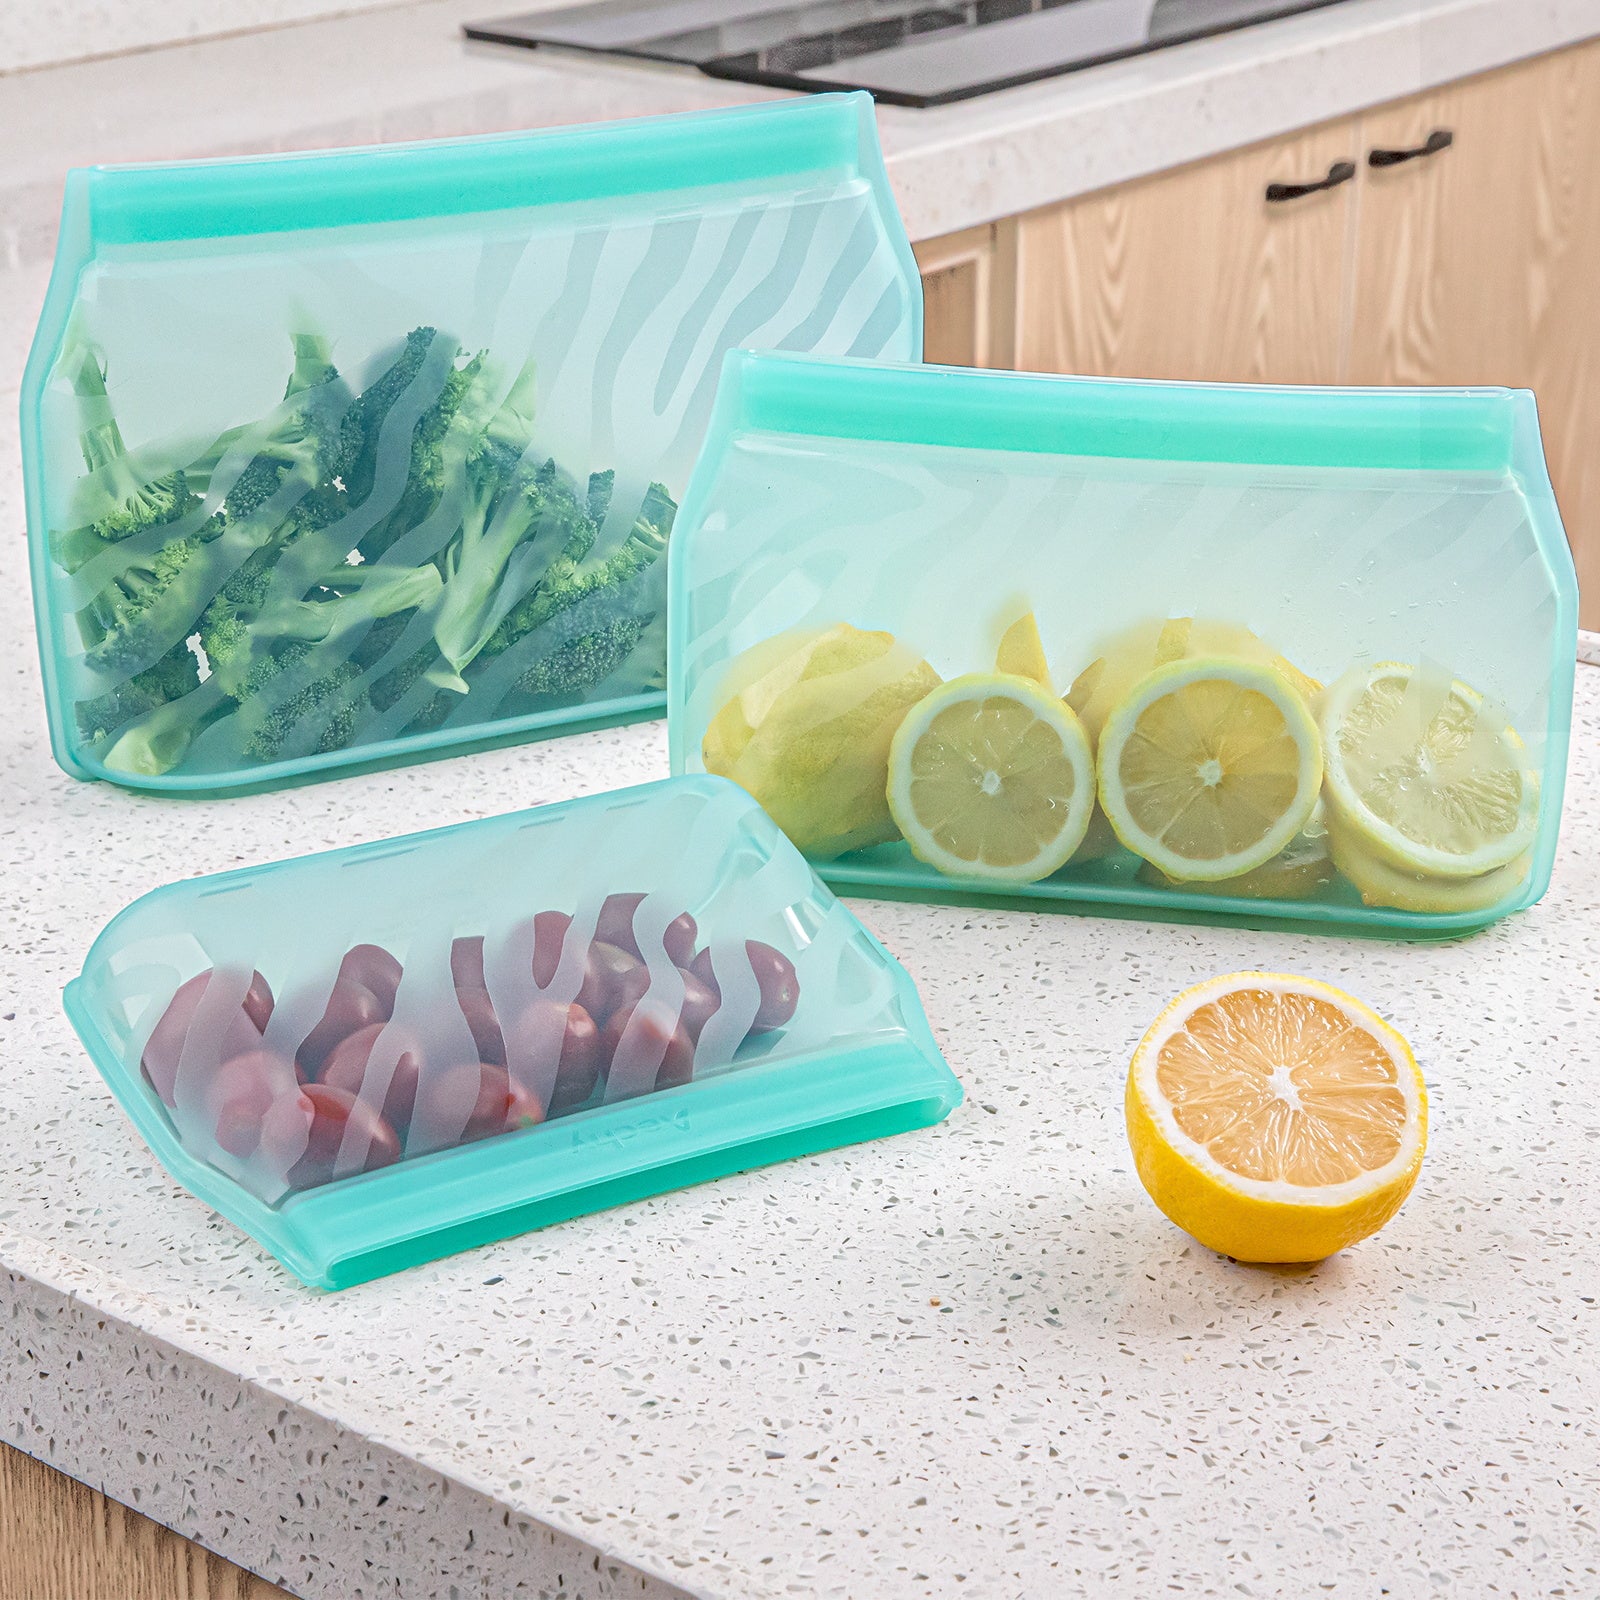  20 Pack Reusable Food Storage Bags and 1 Silicone Bag